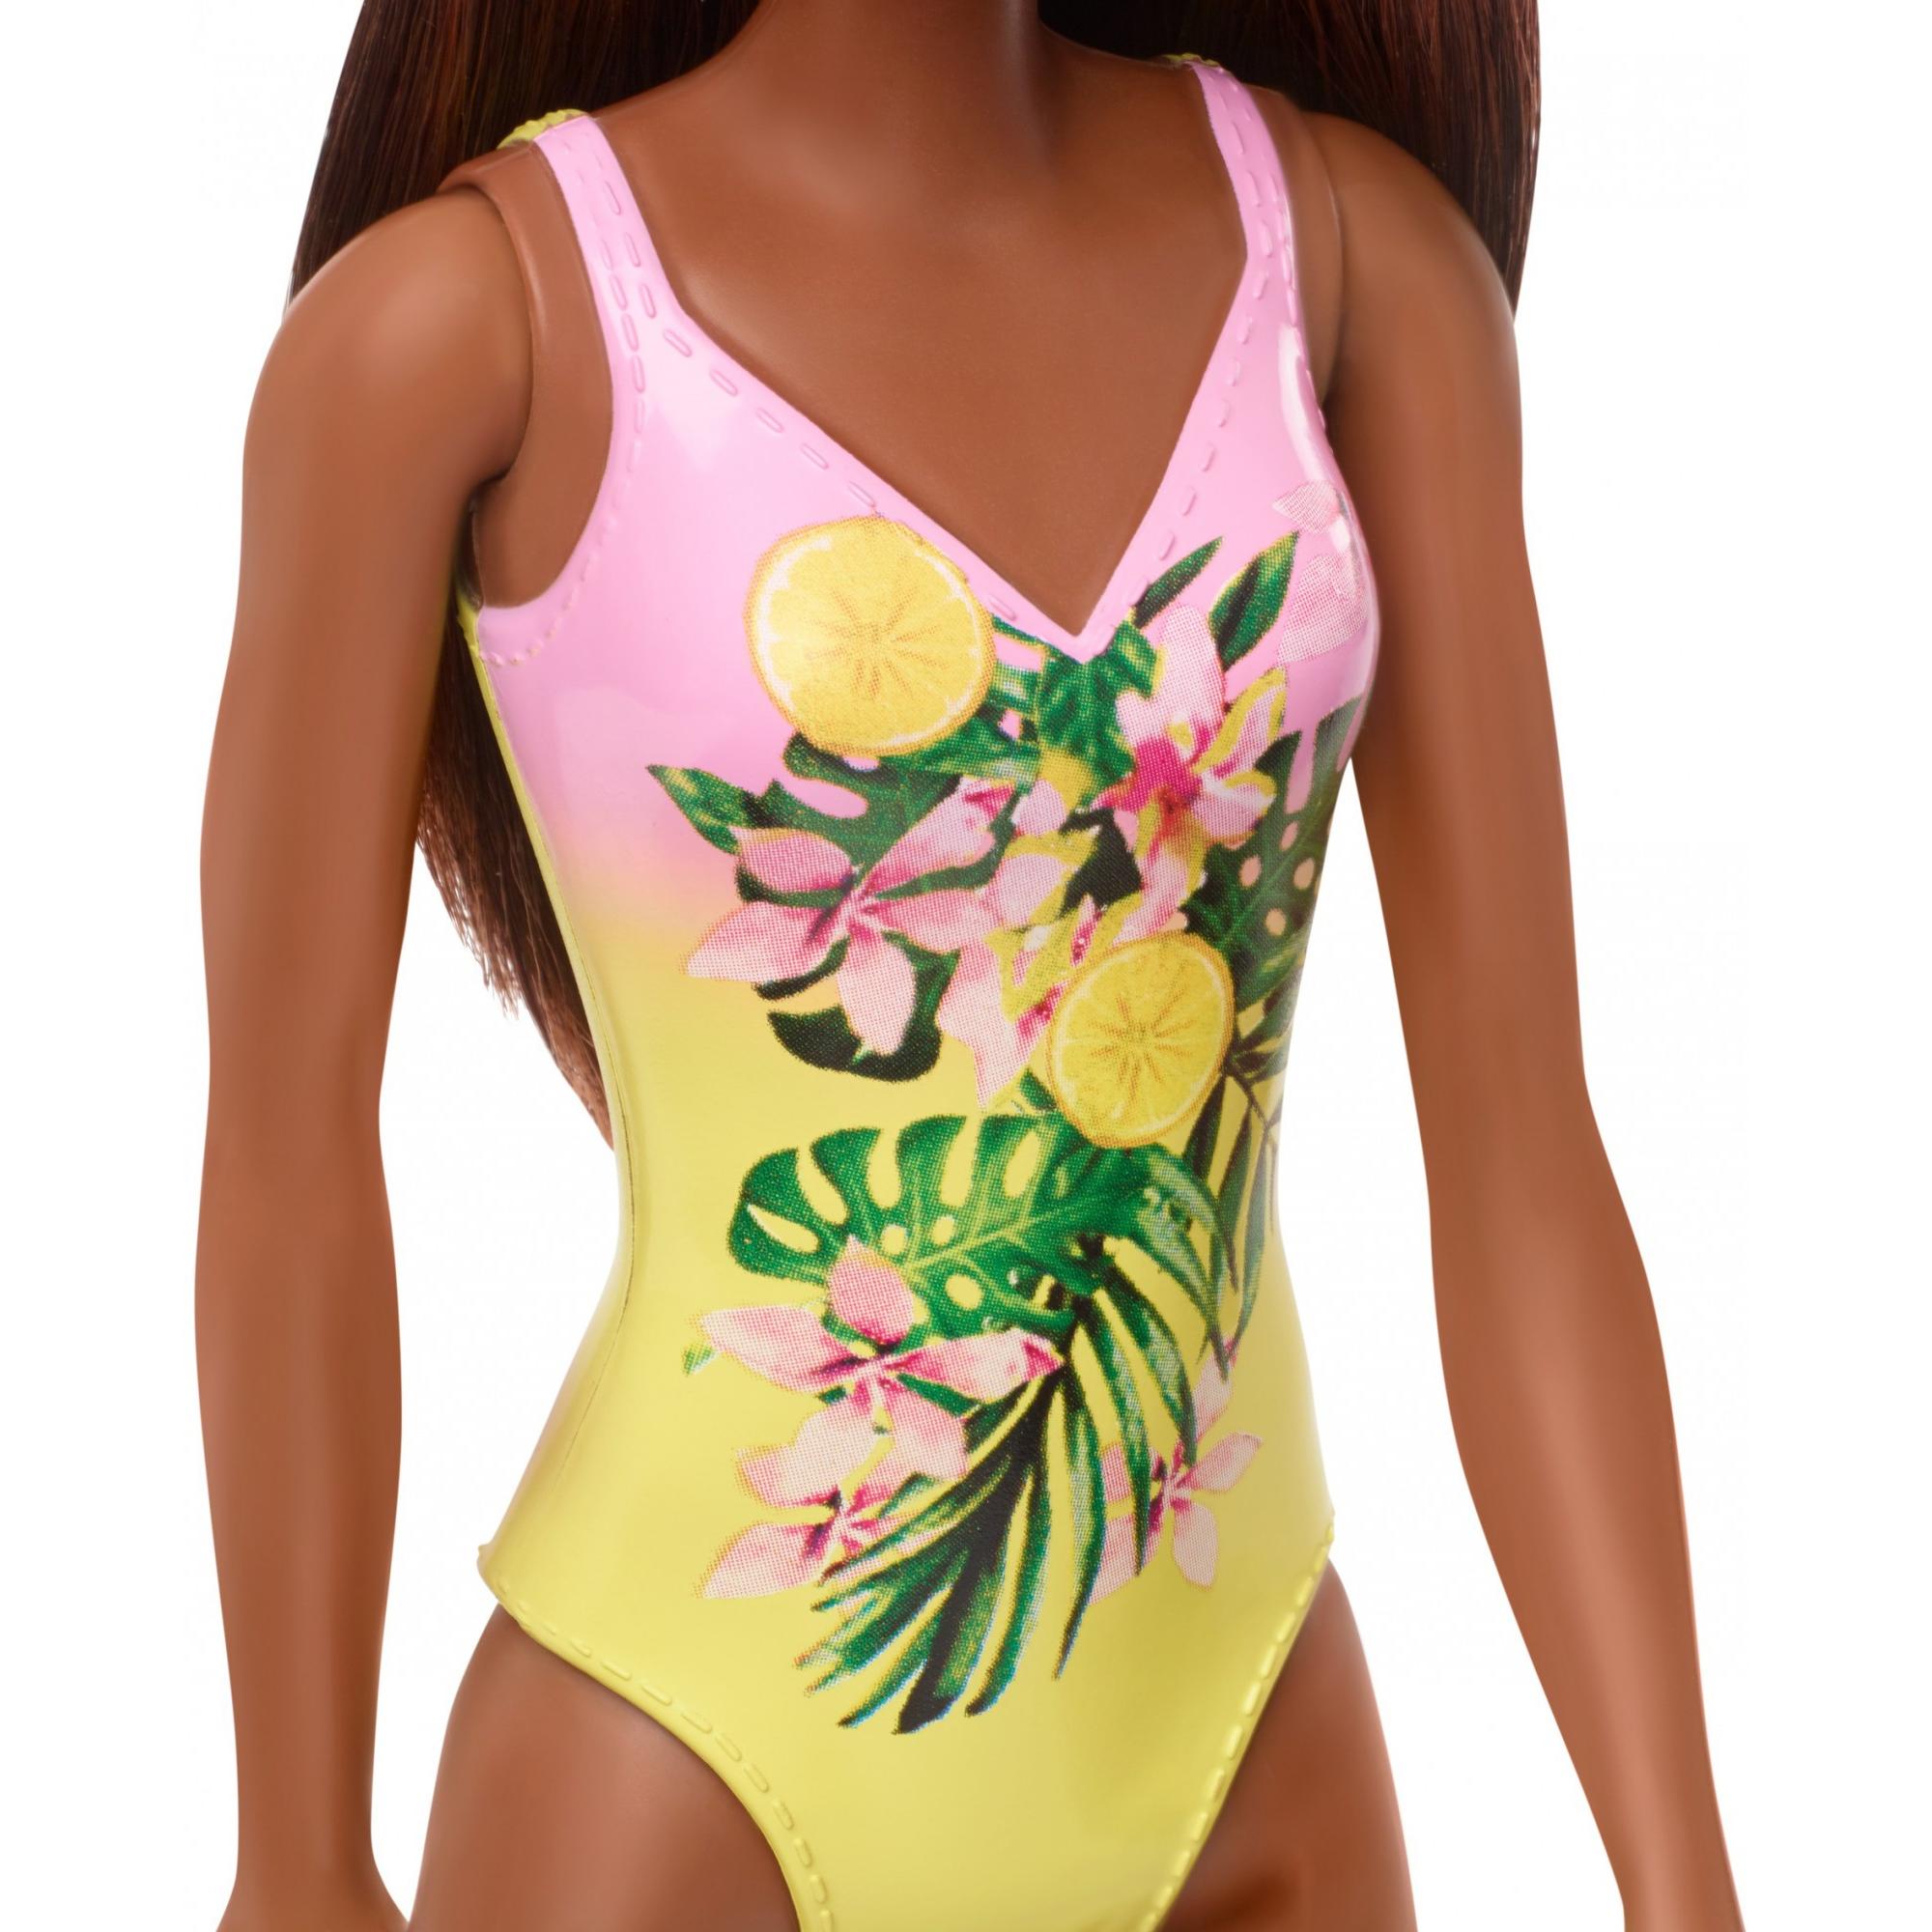 Barbie Swimsuit Beach Doll with Brown Hair & Tropical Floral Print Suit - image 3 of 6